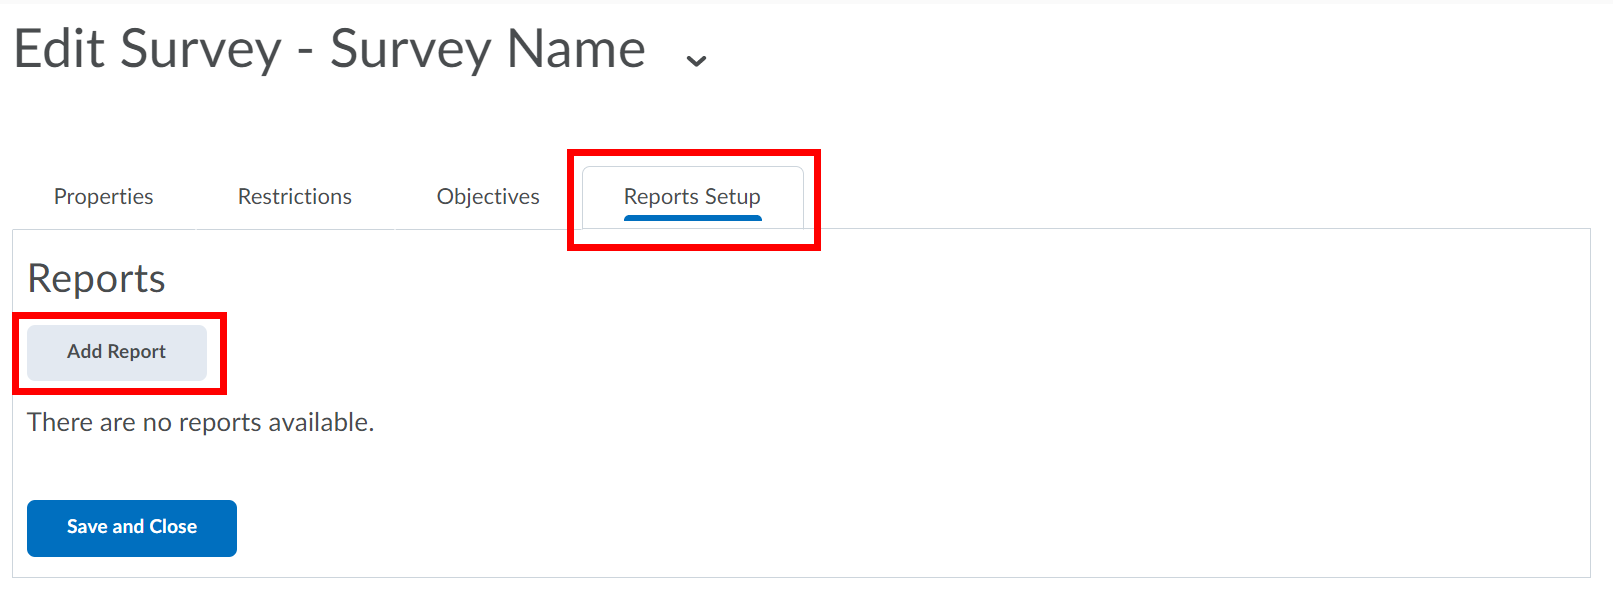 Reports Setup tab highlighted. Add Report button highlighted.